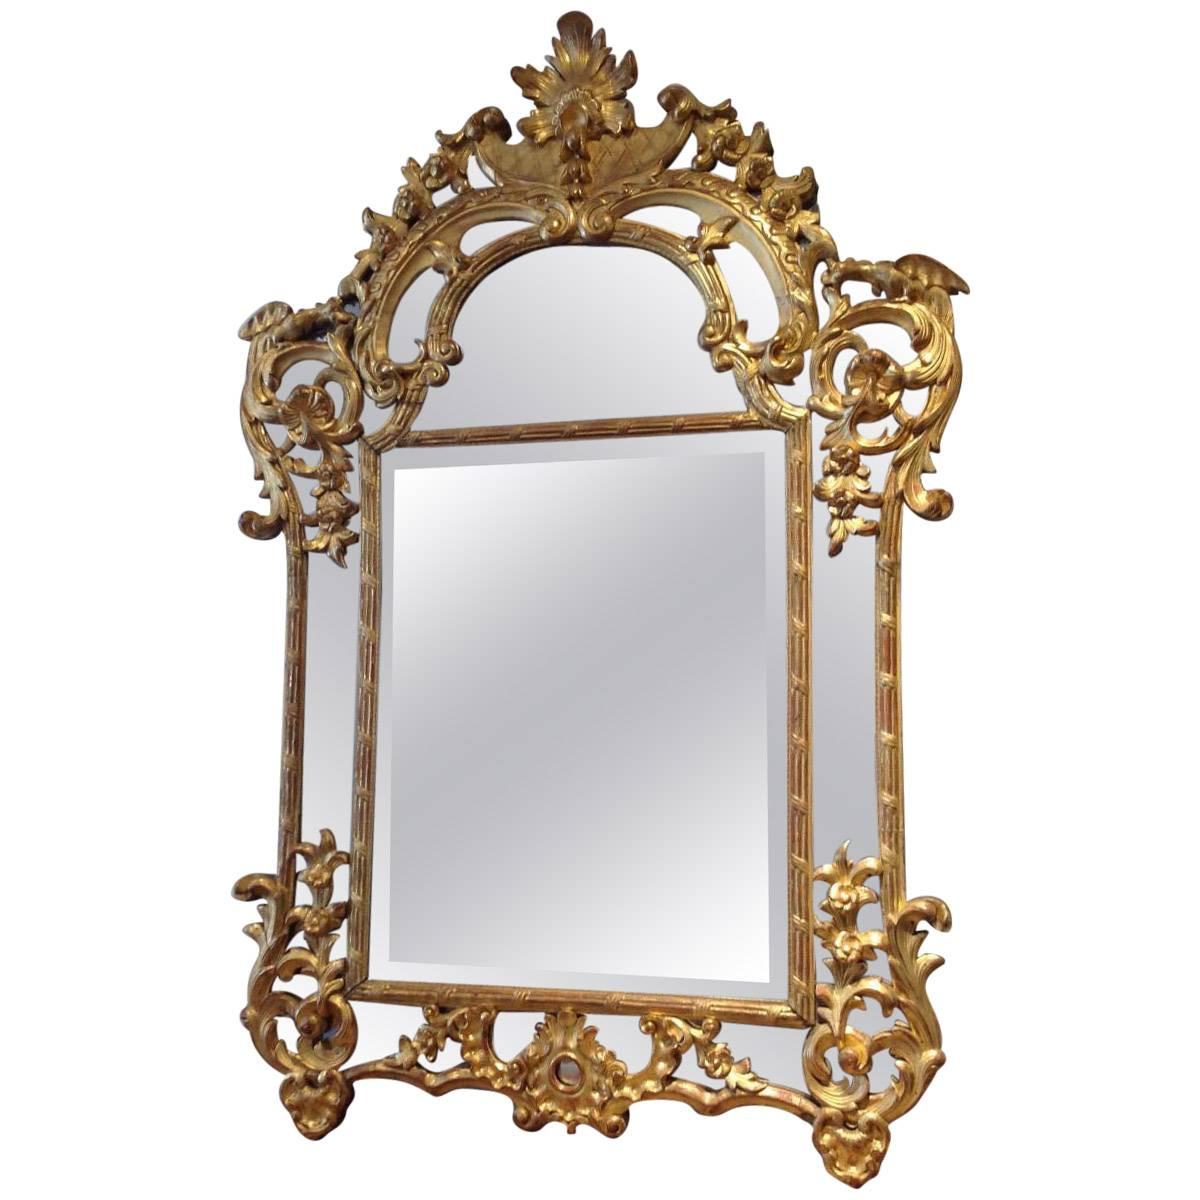 Large Gilded Wood and Mercury Glass Mirror Regency, Early 19th Century For Sale